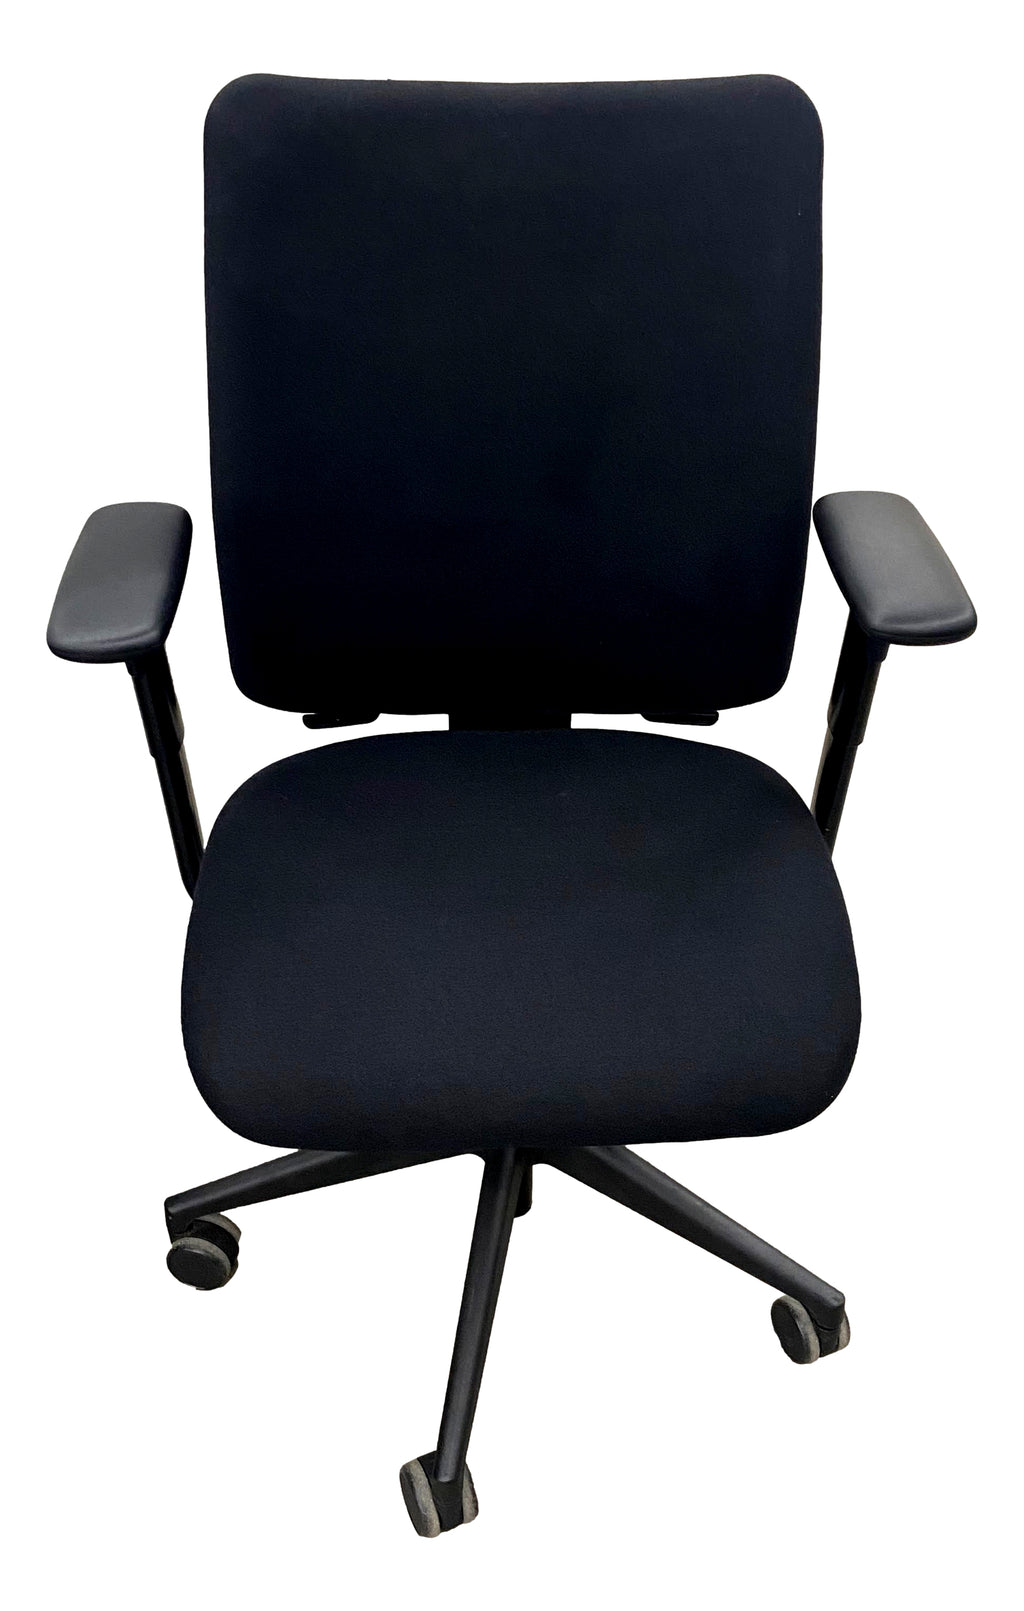 Pre-Owned Steelcase Turnstone Crew Task Chair